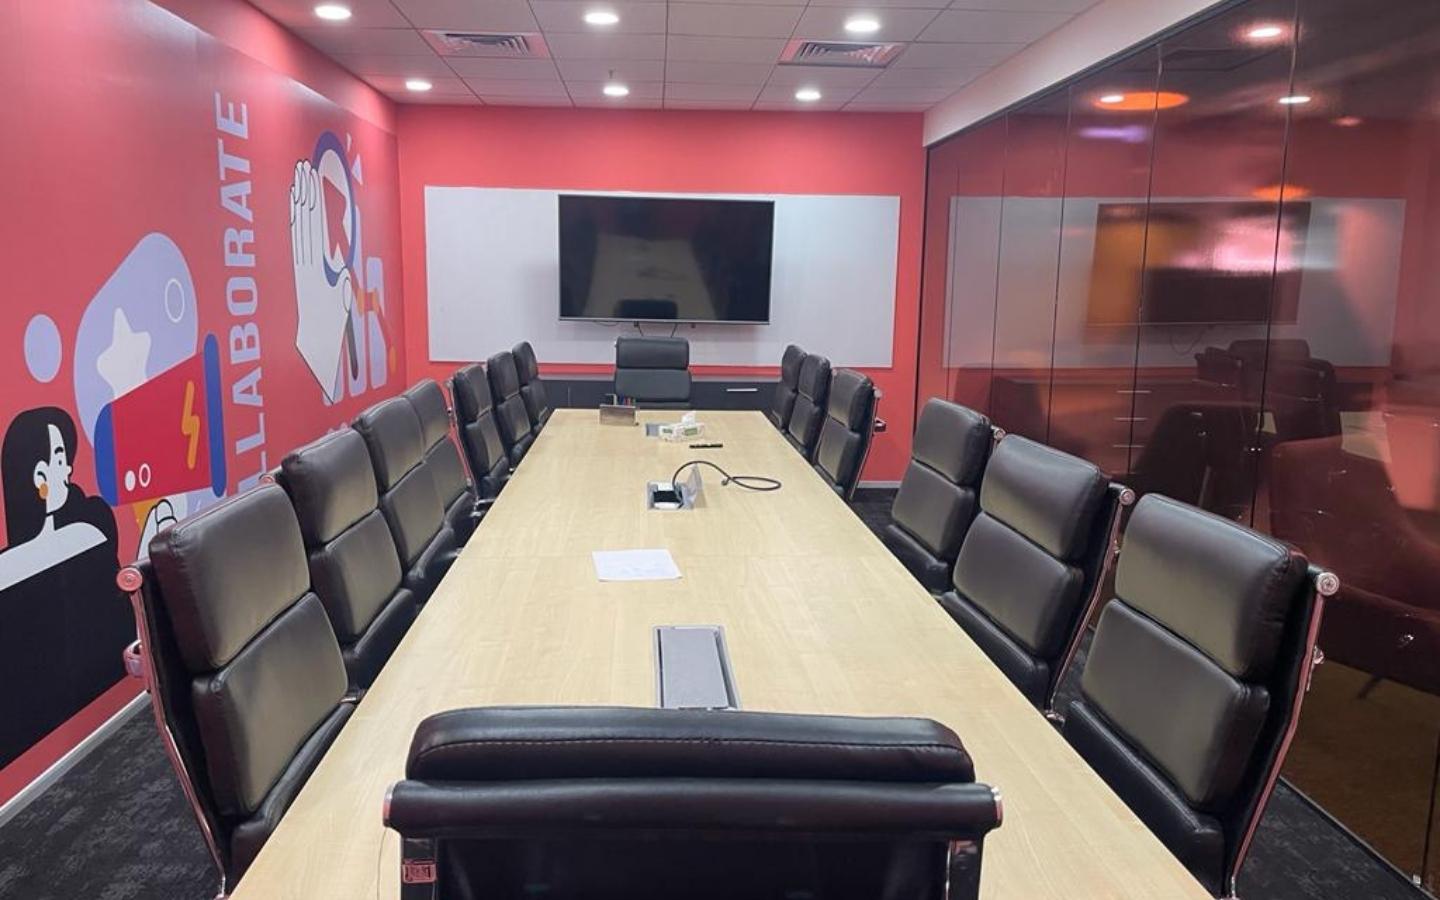 Furnished office space in egl embassy golf link Bangalore.